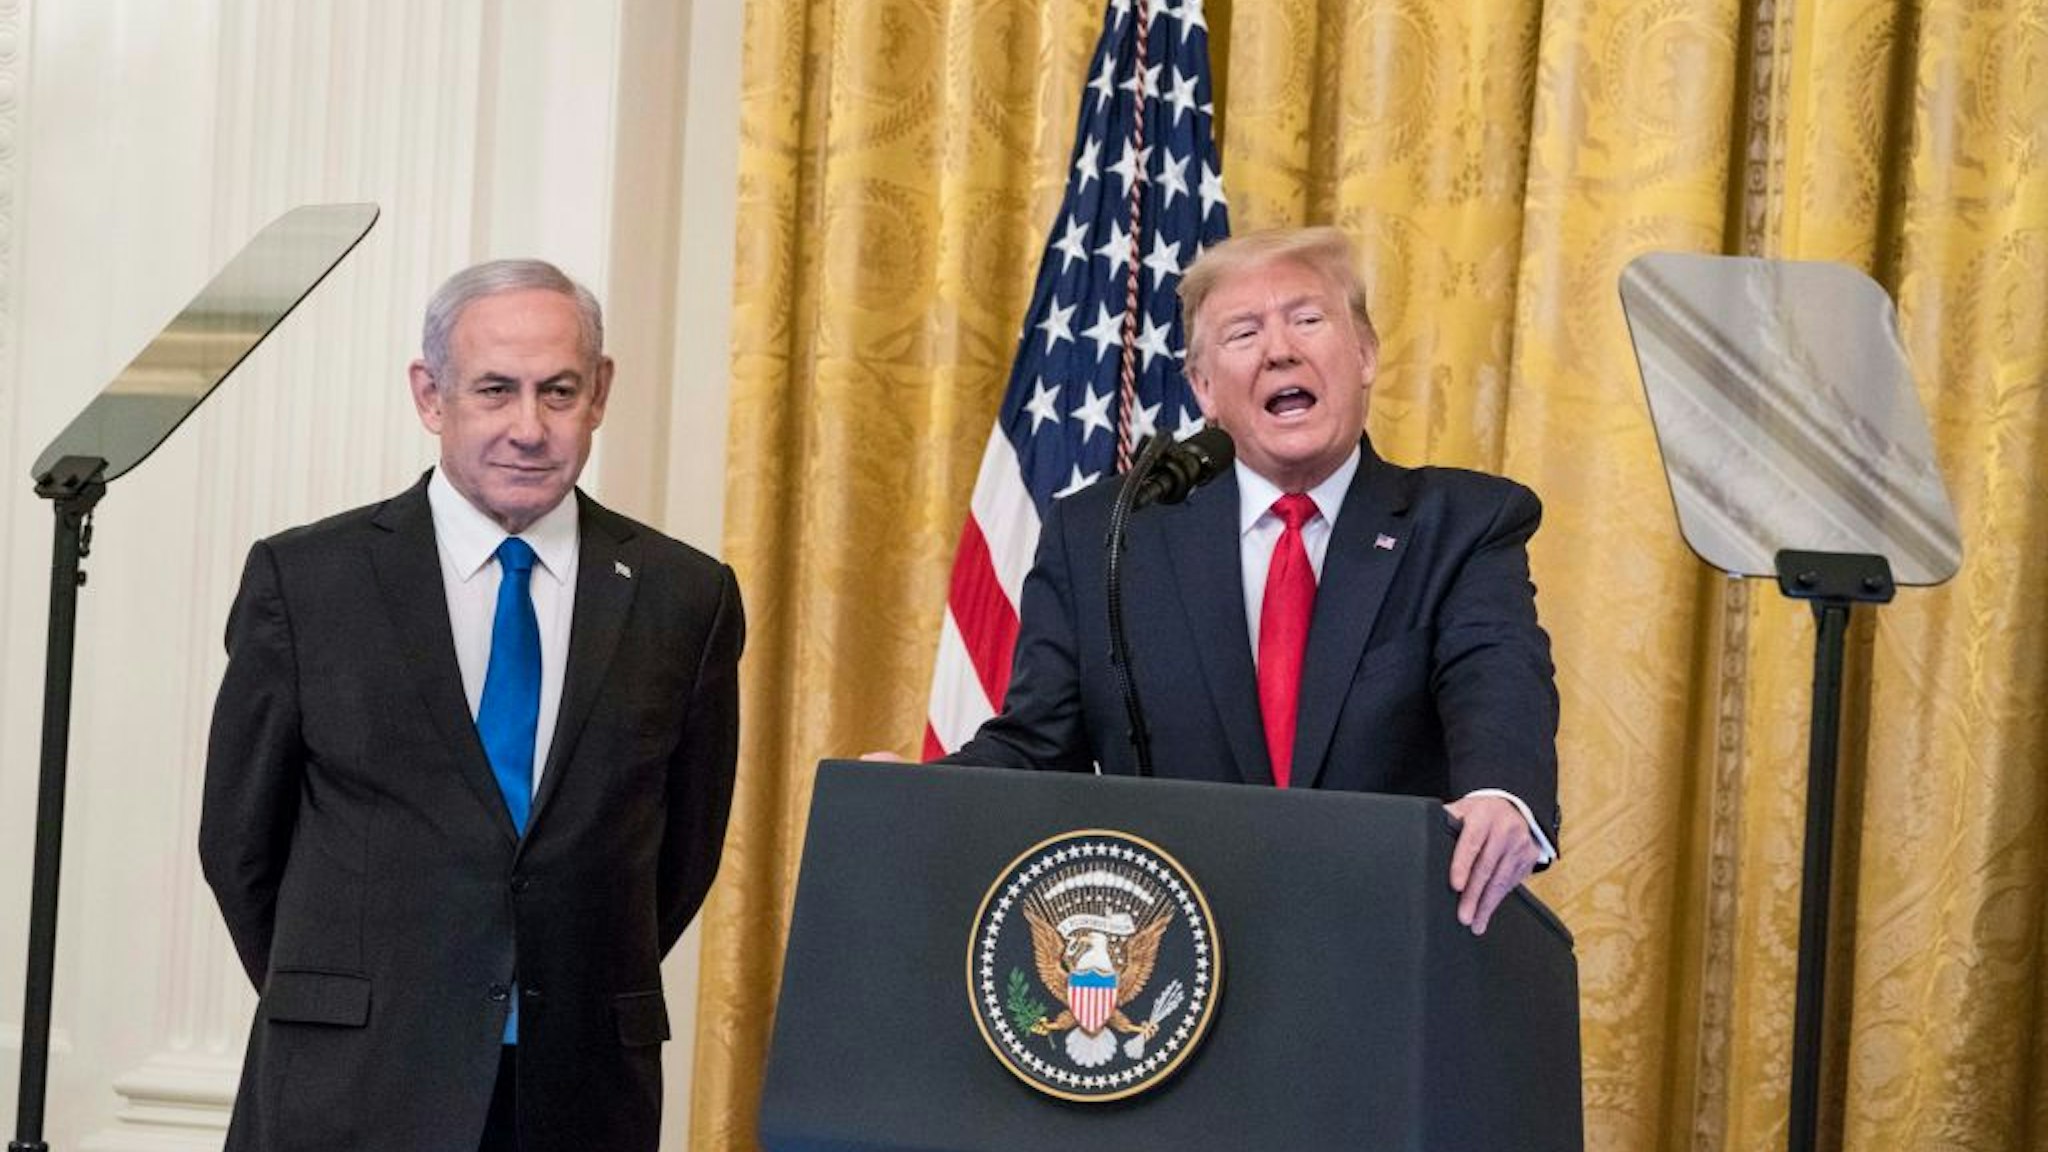 U.S. President Donald Trump and Israeli Prime Minister Benjamin Netanyahu participate in a joint statement in the East Room of the White House on January 28, 2020 in Washington, DC.